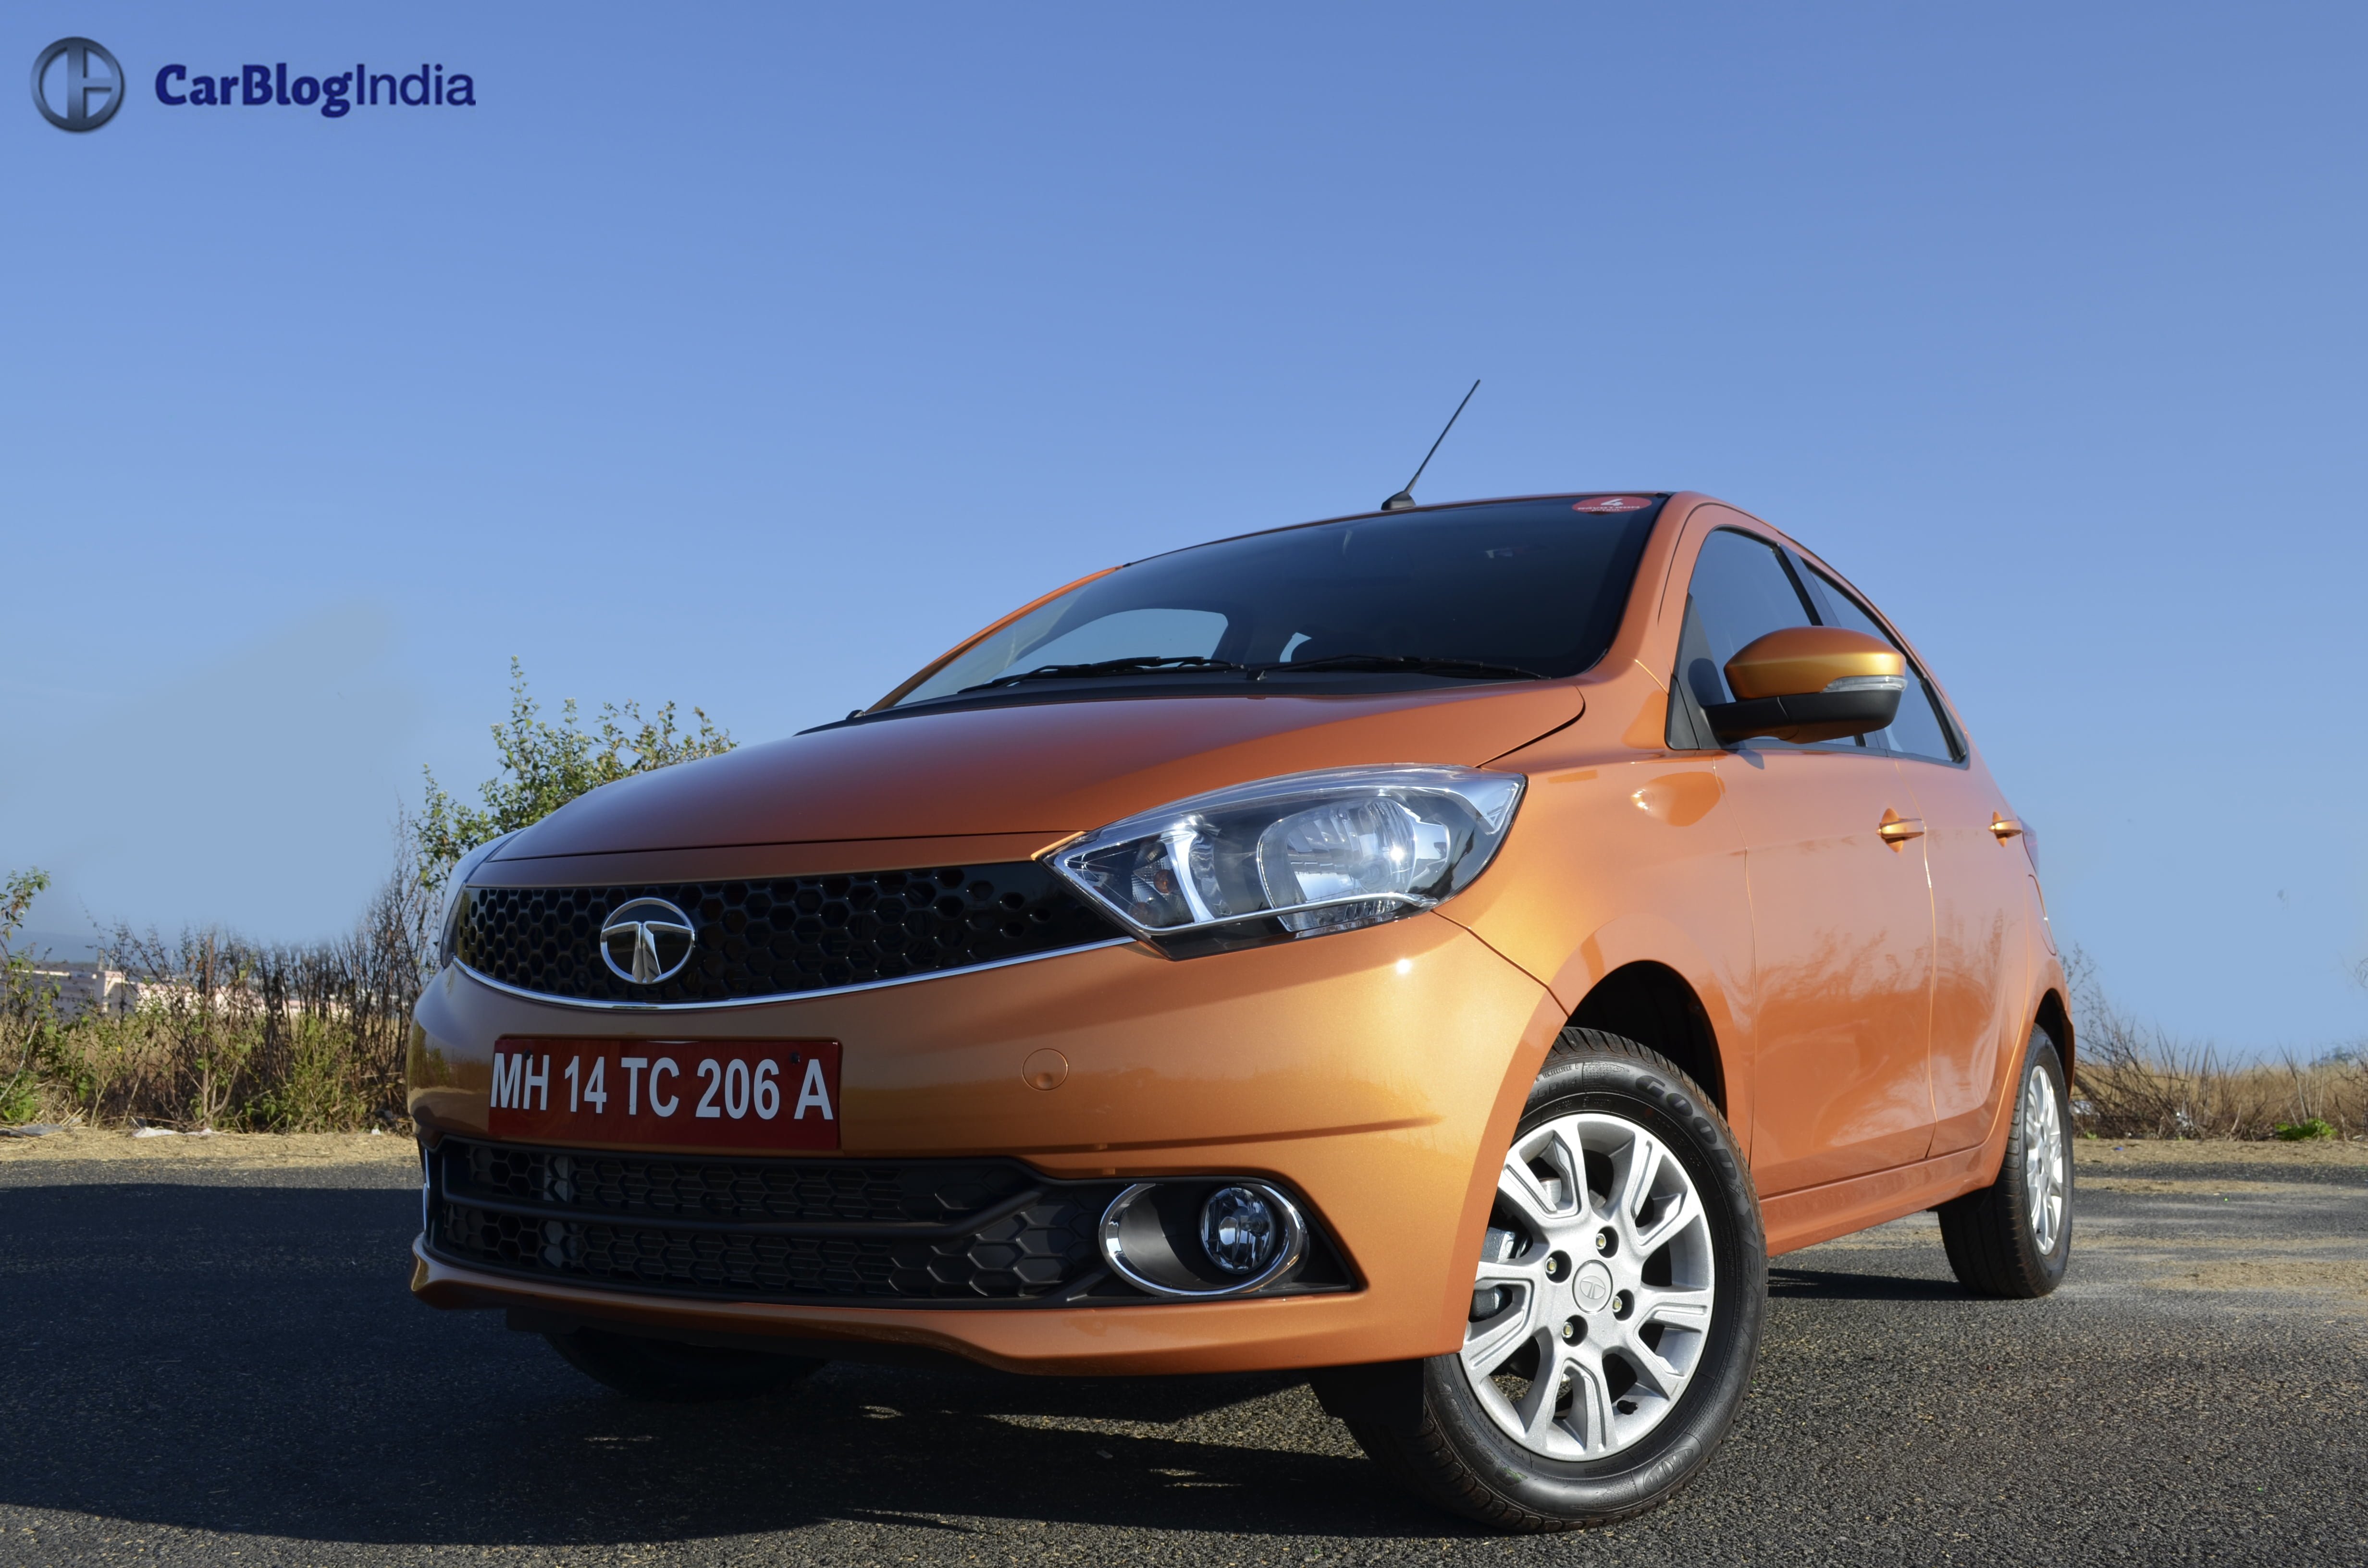 Tata Tiago NRG XZA AMT On Road Price in Gurgaon, New Delhi & 2023 Offers,  Images